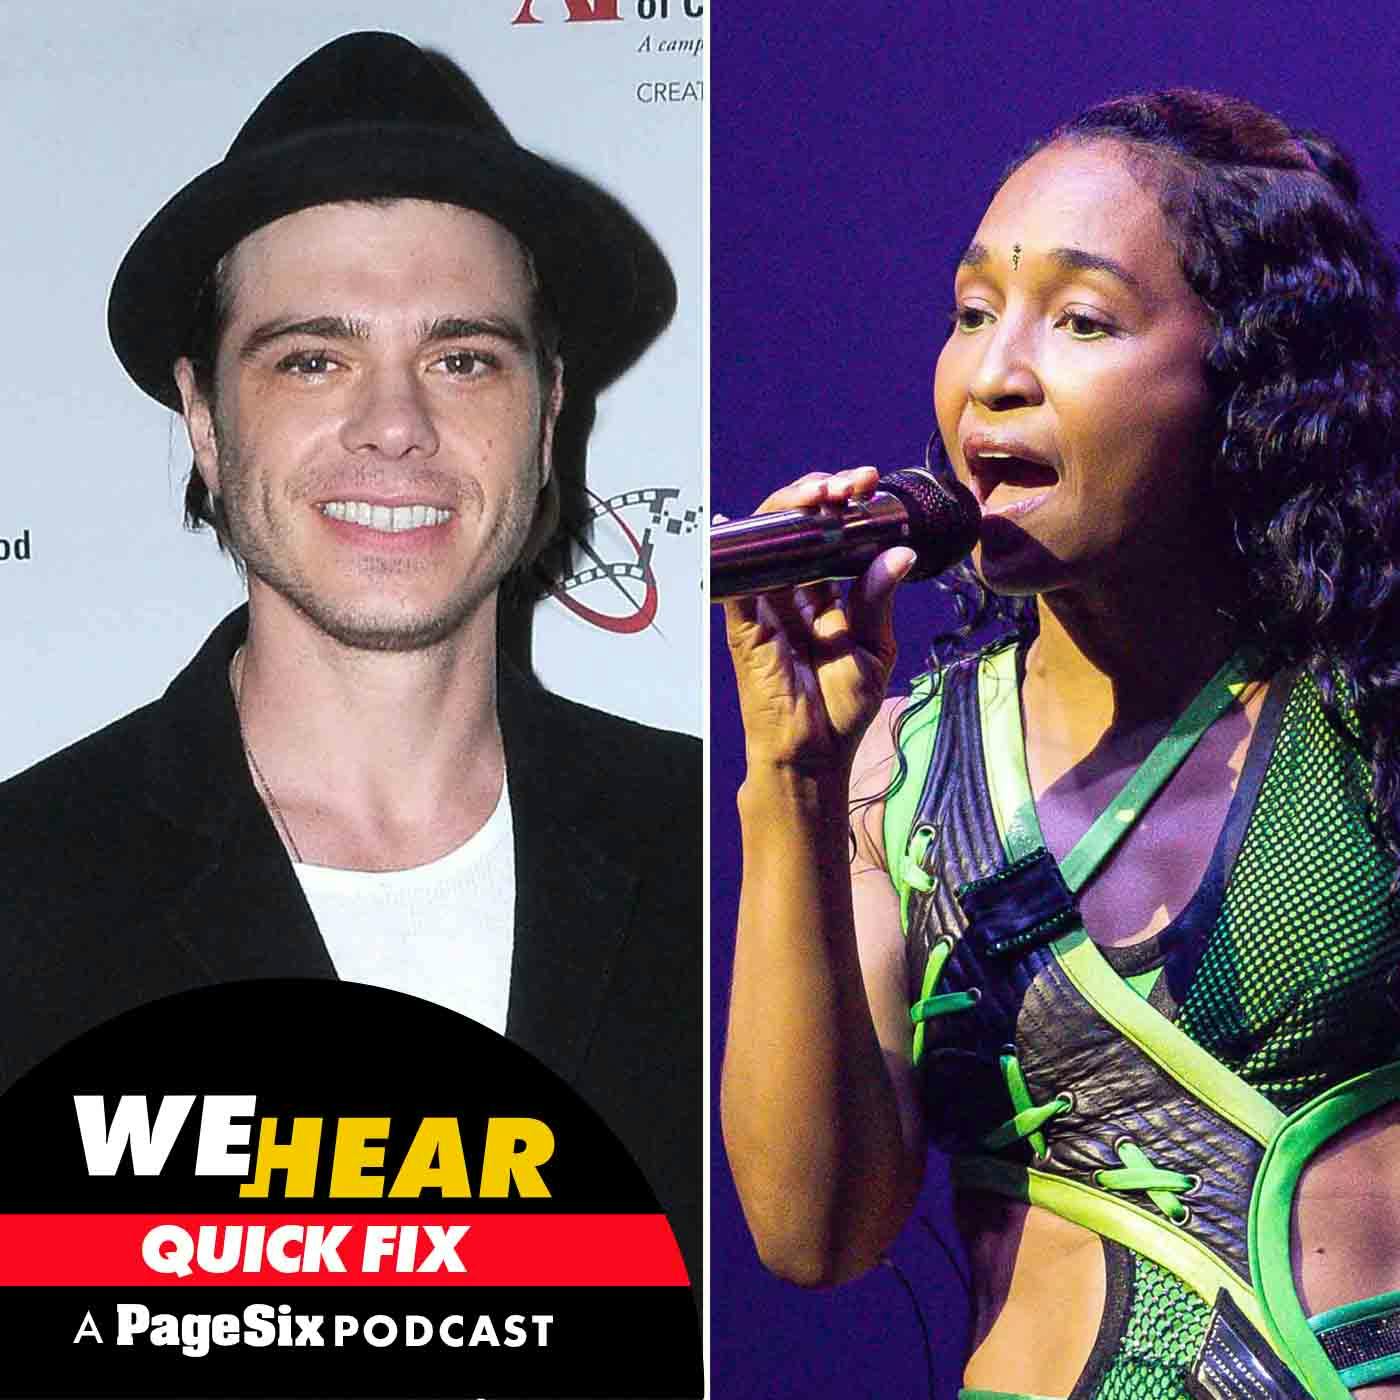 TLC's Chilli and 'Boy Meets World' star Matthew Lawrence are dating, more